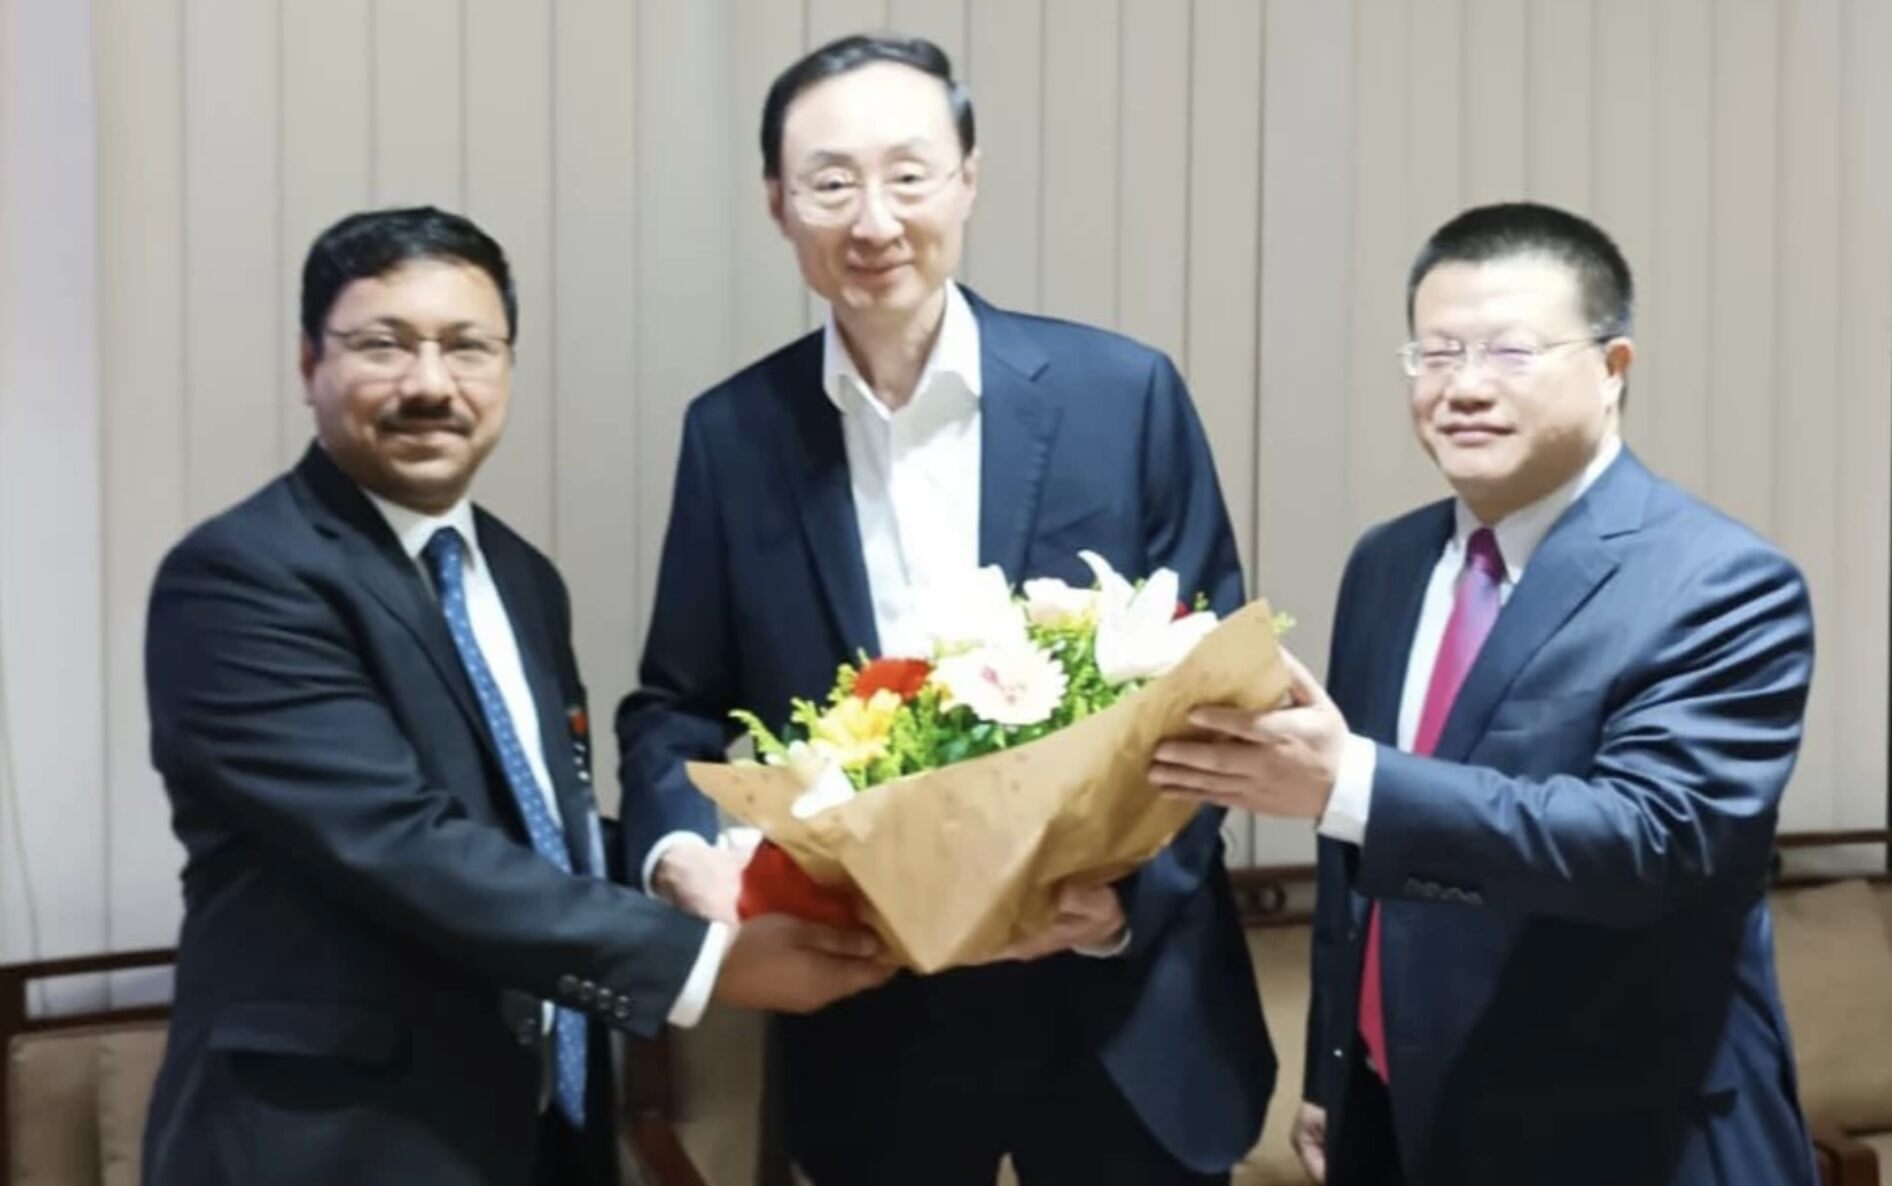 Chinese vice-minister of foreign affairs Sun Weidong in city